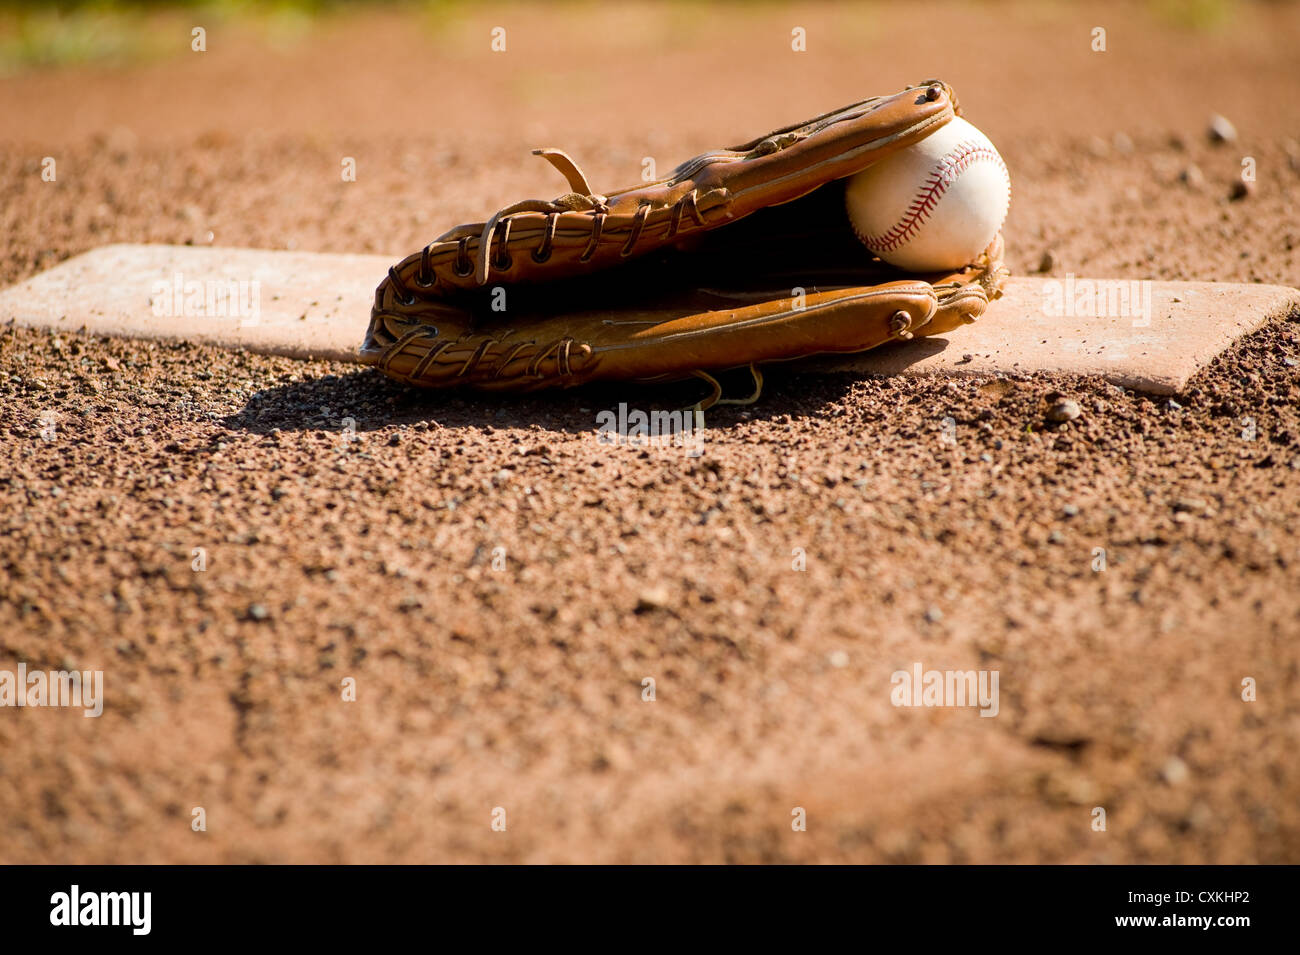 A brown leather baseball glove and a white leather baseball on a pitcher's mound at a baseball field, with copy space Stock Photo